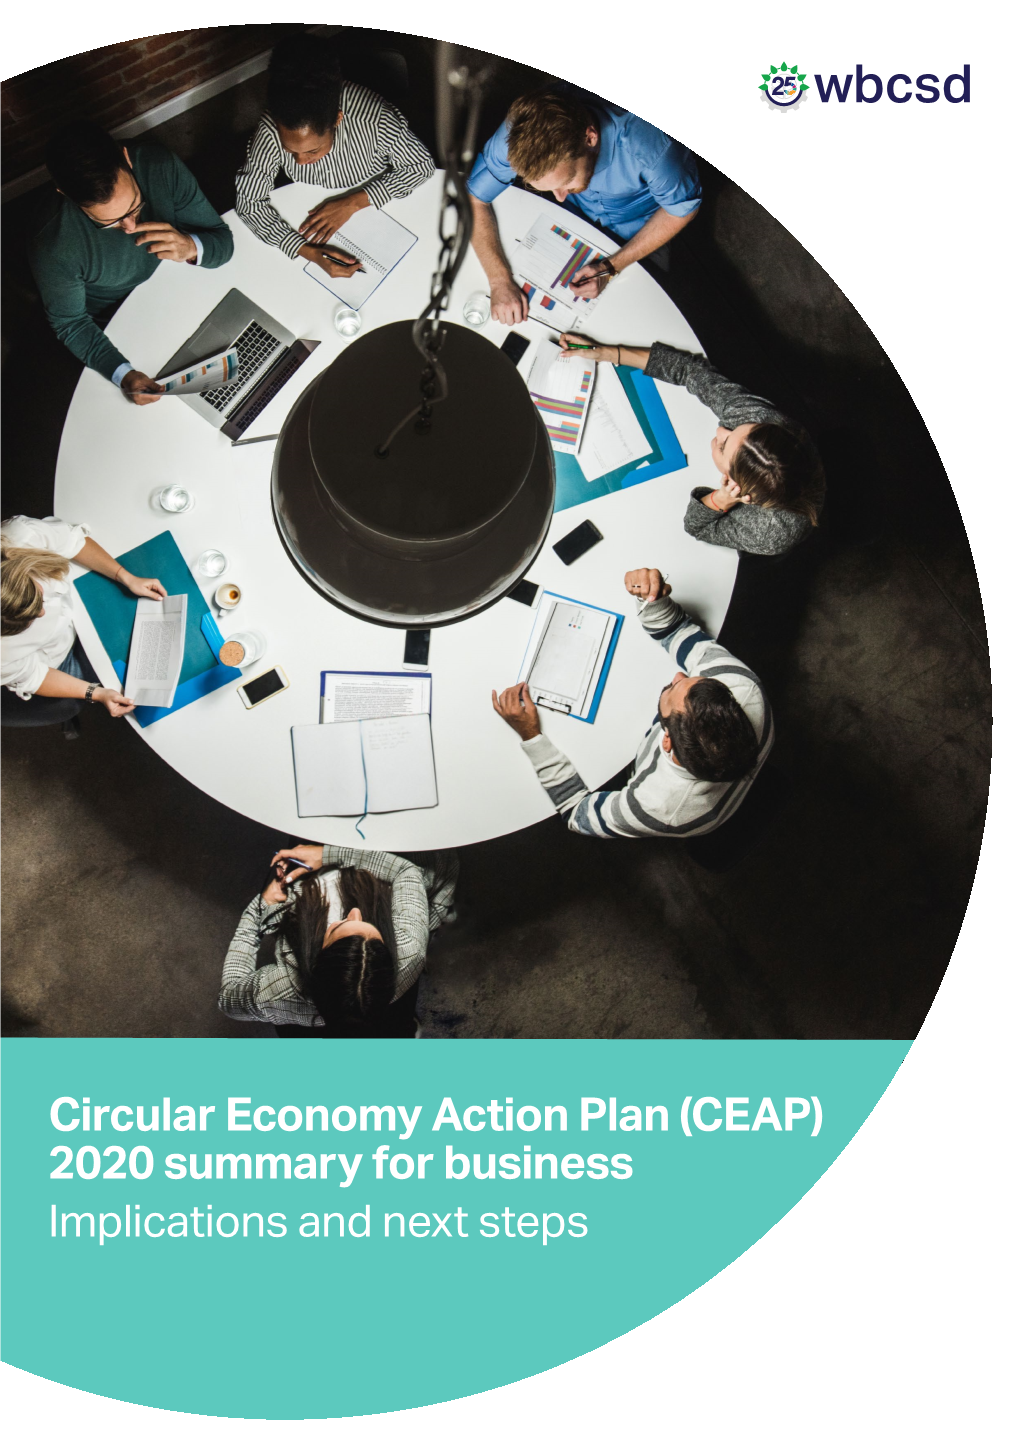 Circular Economy Action Plan (CEAP) 2020 Summary for Business Implications and Next Steps Contents